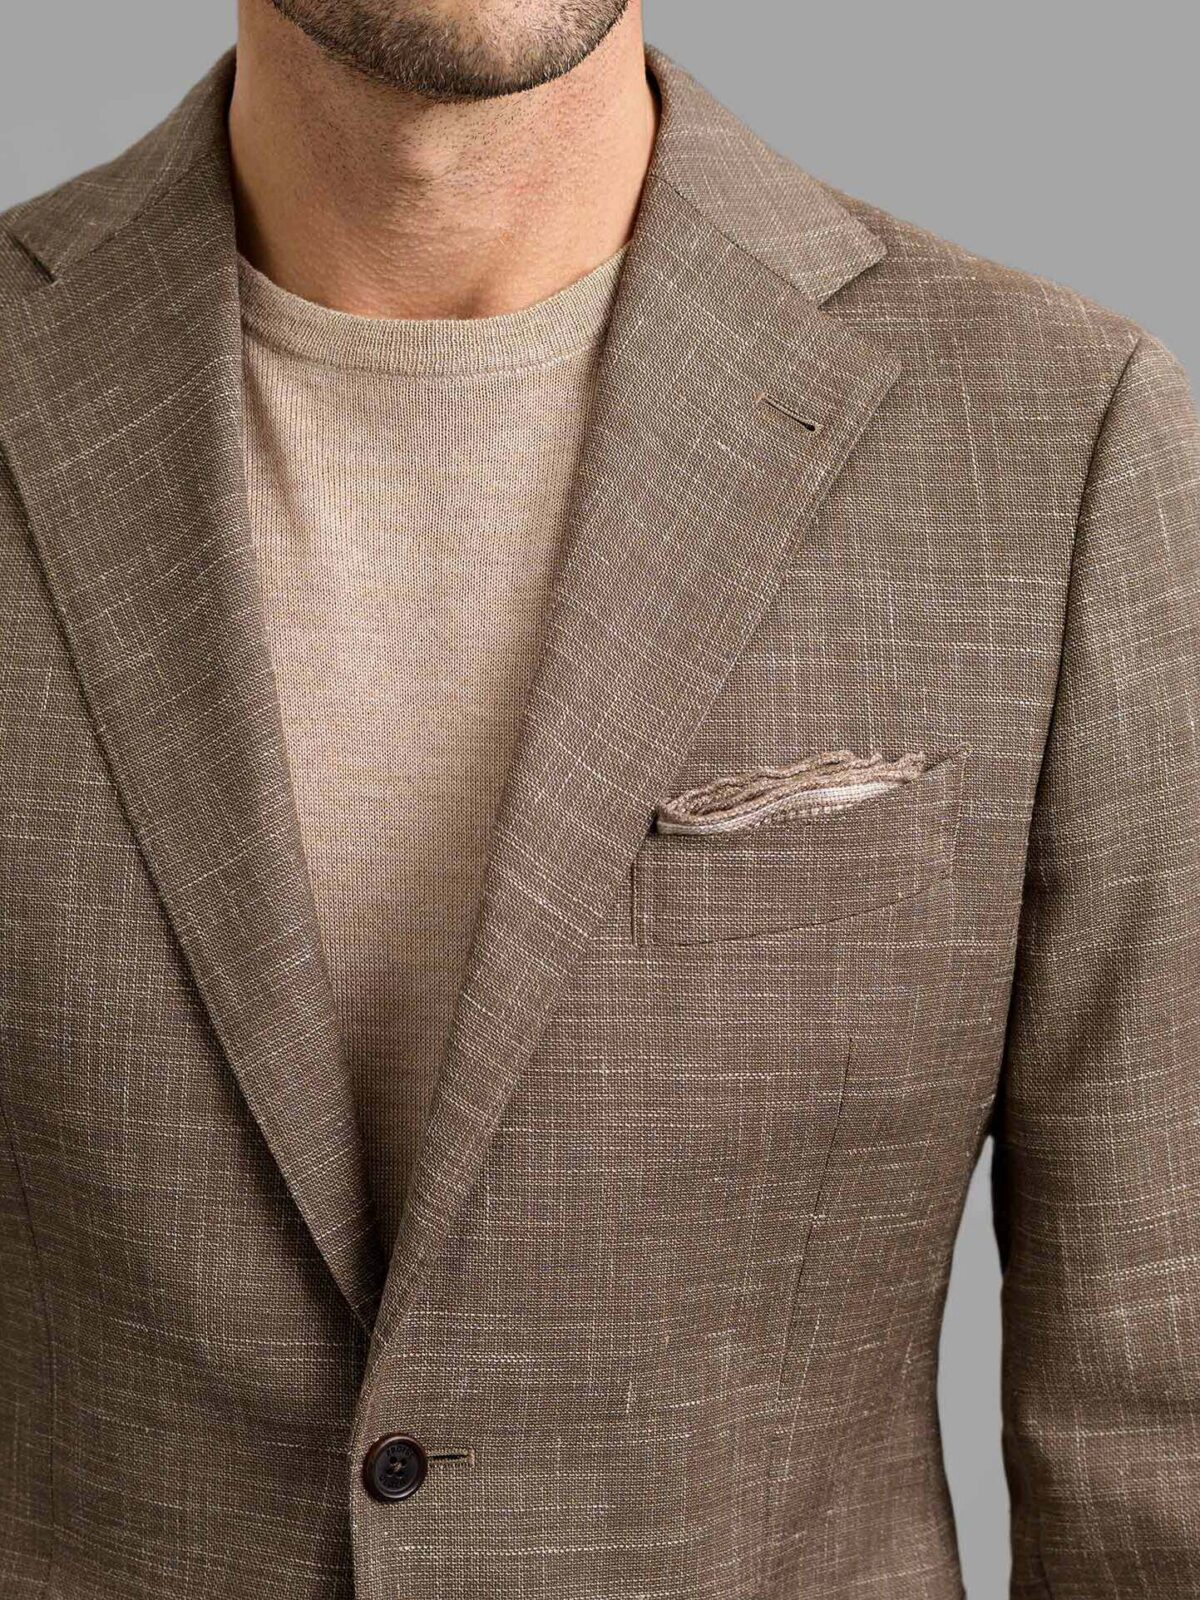 and Custom Stretch Linen Clothing - Mocha Tailored Jacket Wool Fit Bedford